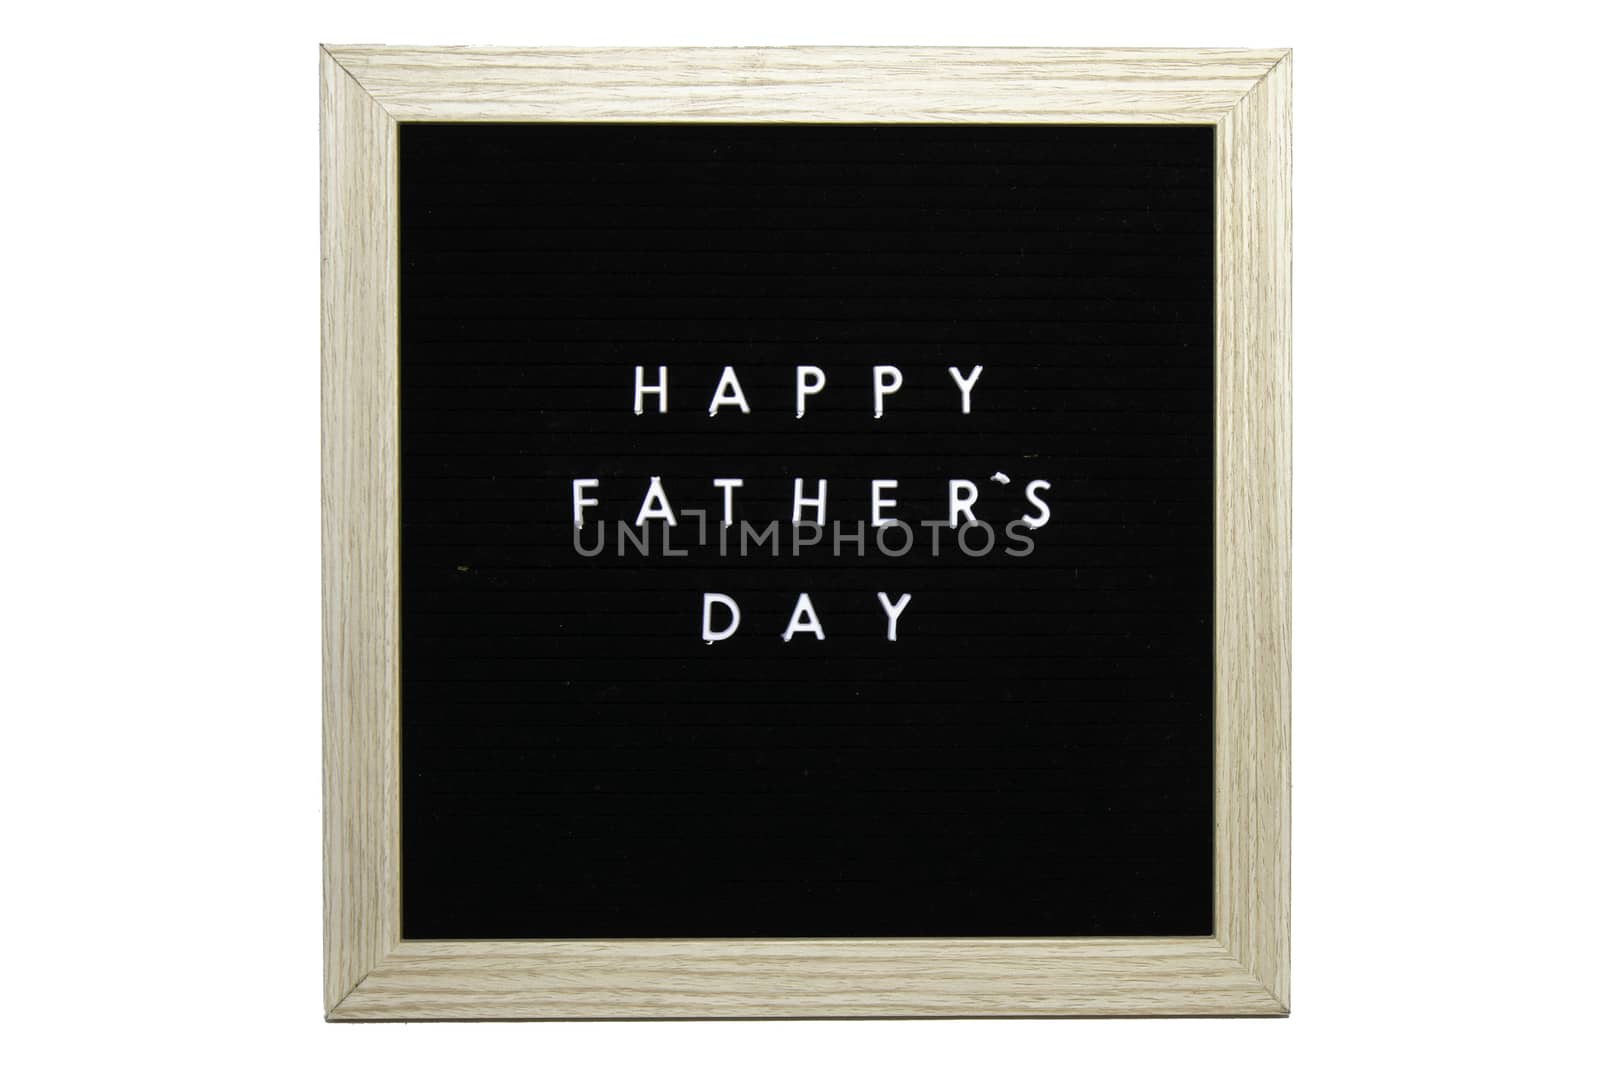 A Black Sign With a Birch Frame That Says Happy Fathers Day in White Letters on a Pure White Background